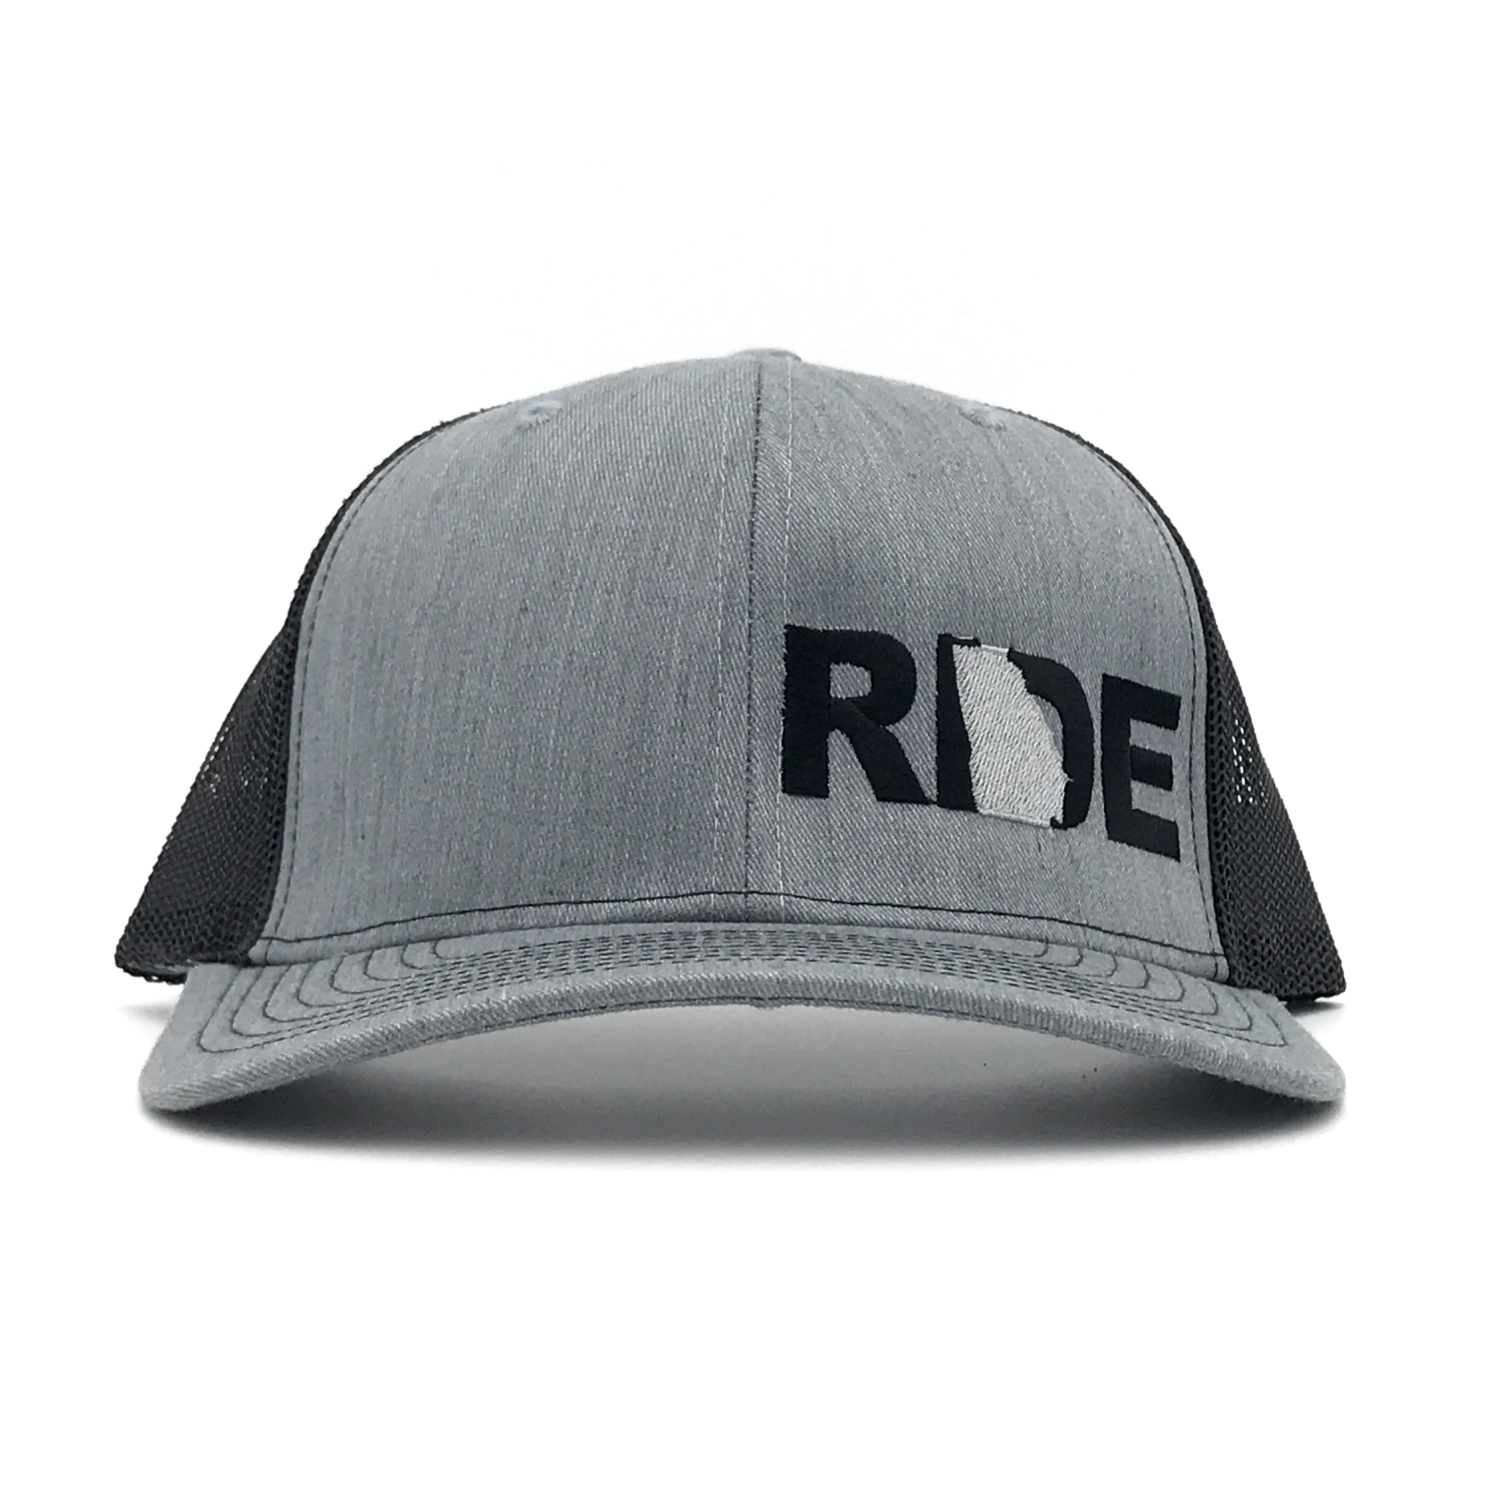 Ride Georgia Classic Pro Night Out Embroidered Snapback Trucker Hat Heather Gray/Black